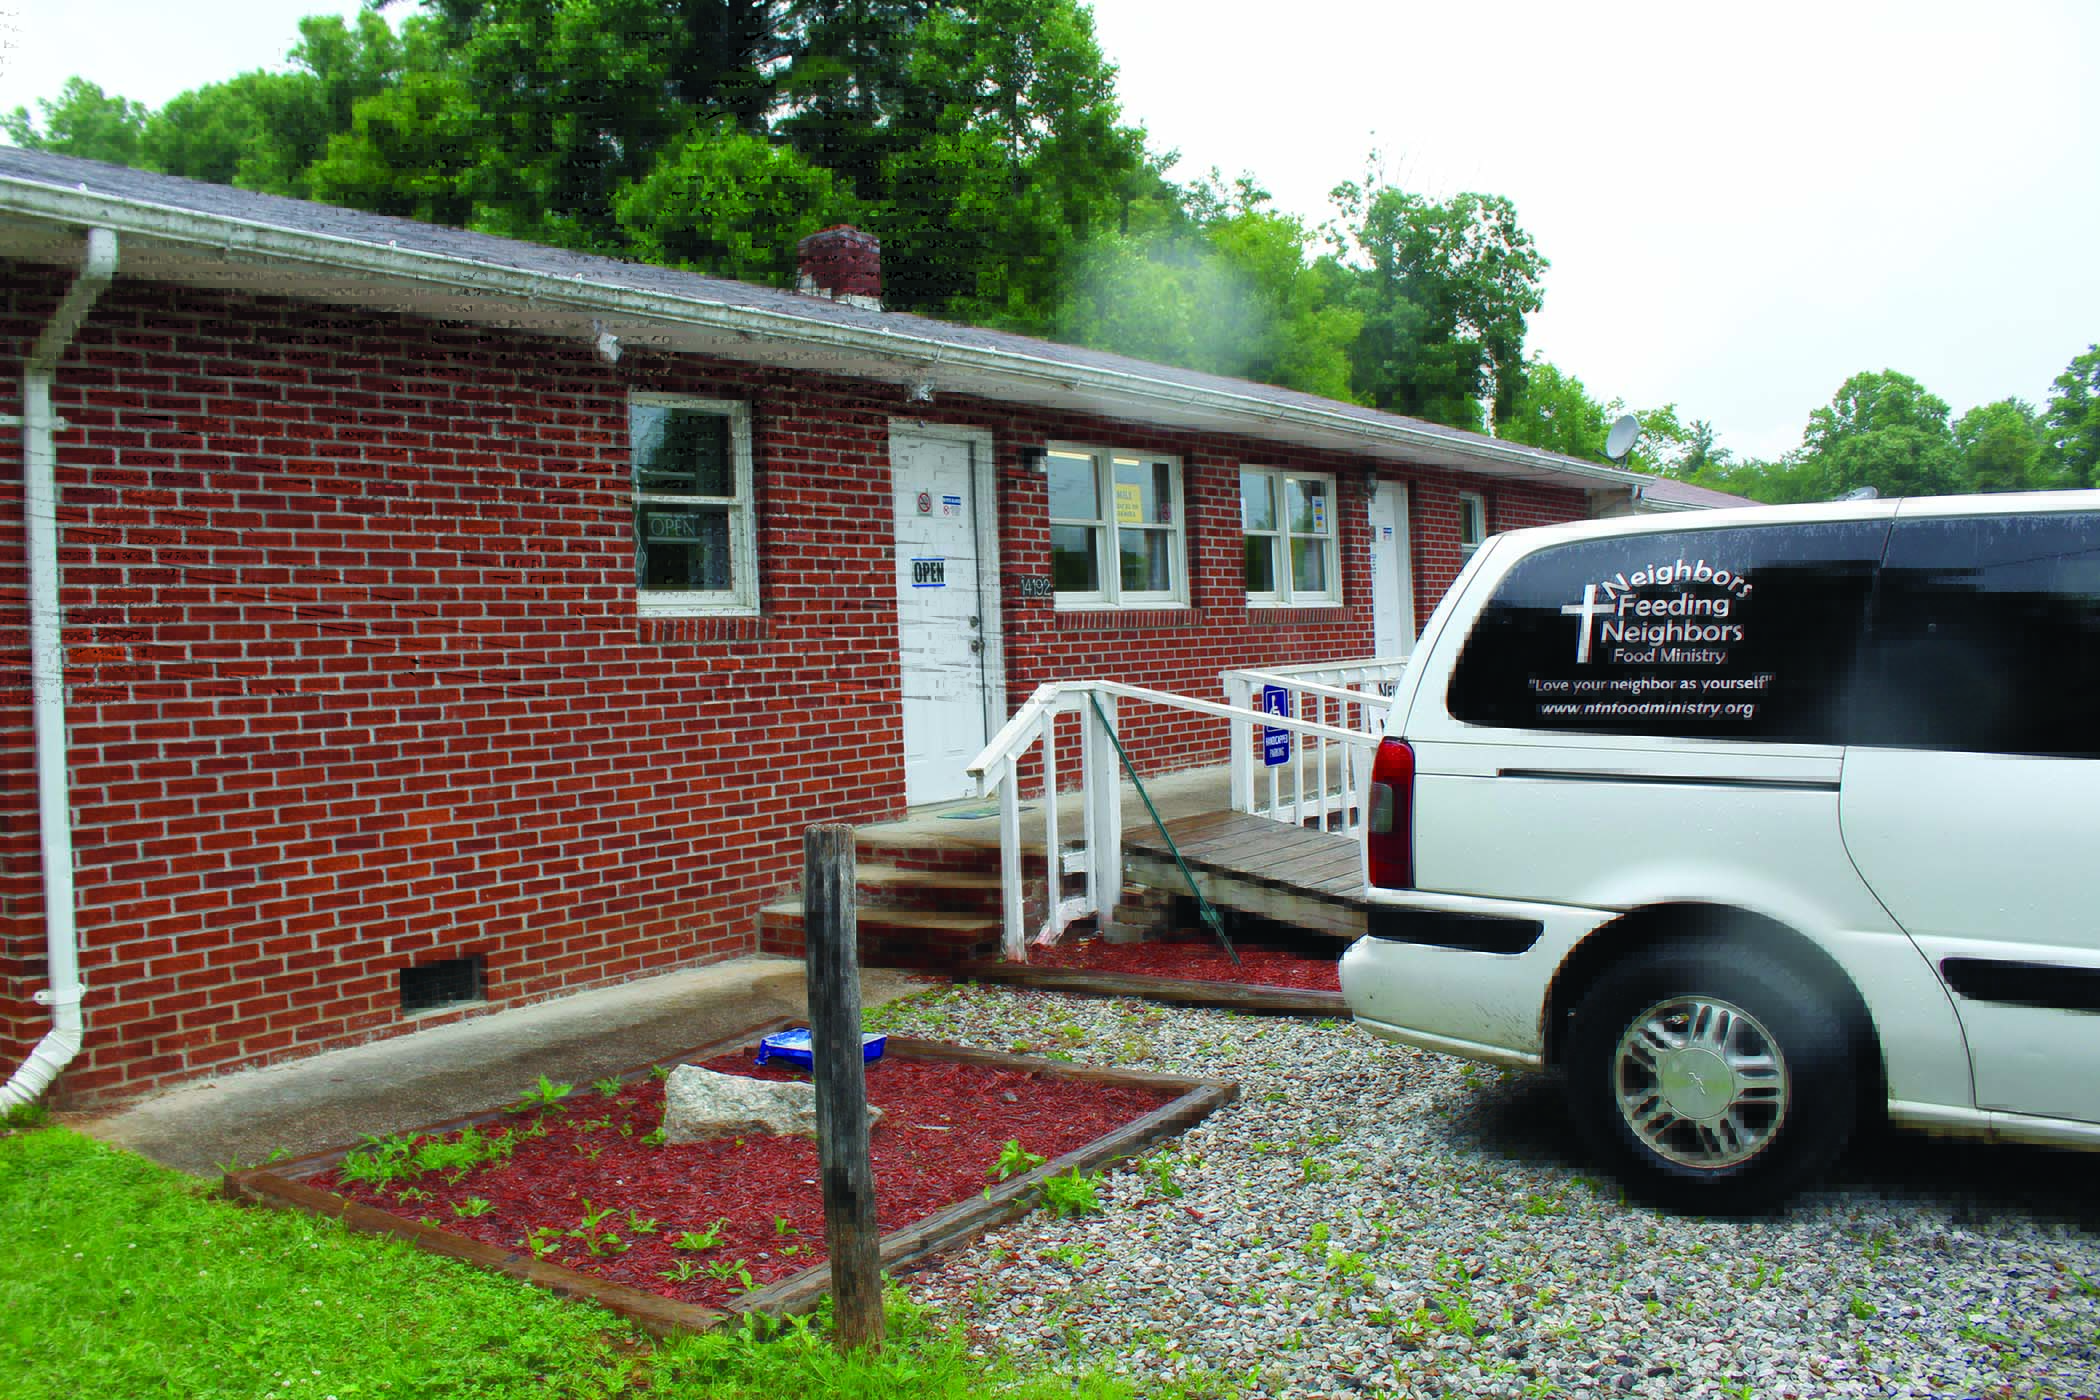 Neighbors Feeding Neighbors food ministry has found a new home in Spruce Pine. The building sits ready for visitors with the ministry van parked outside. Photo by Cory Spiers/MNJ.